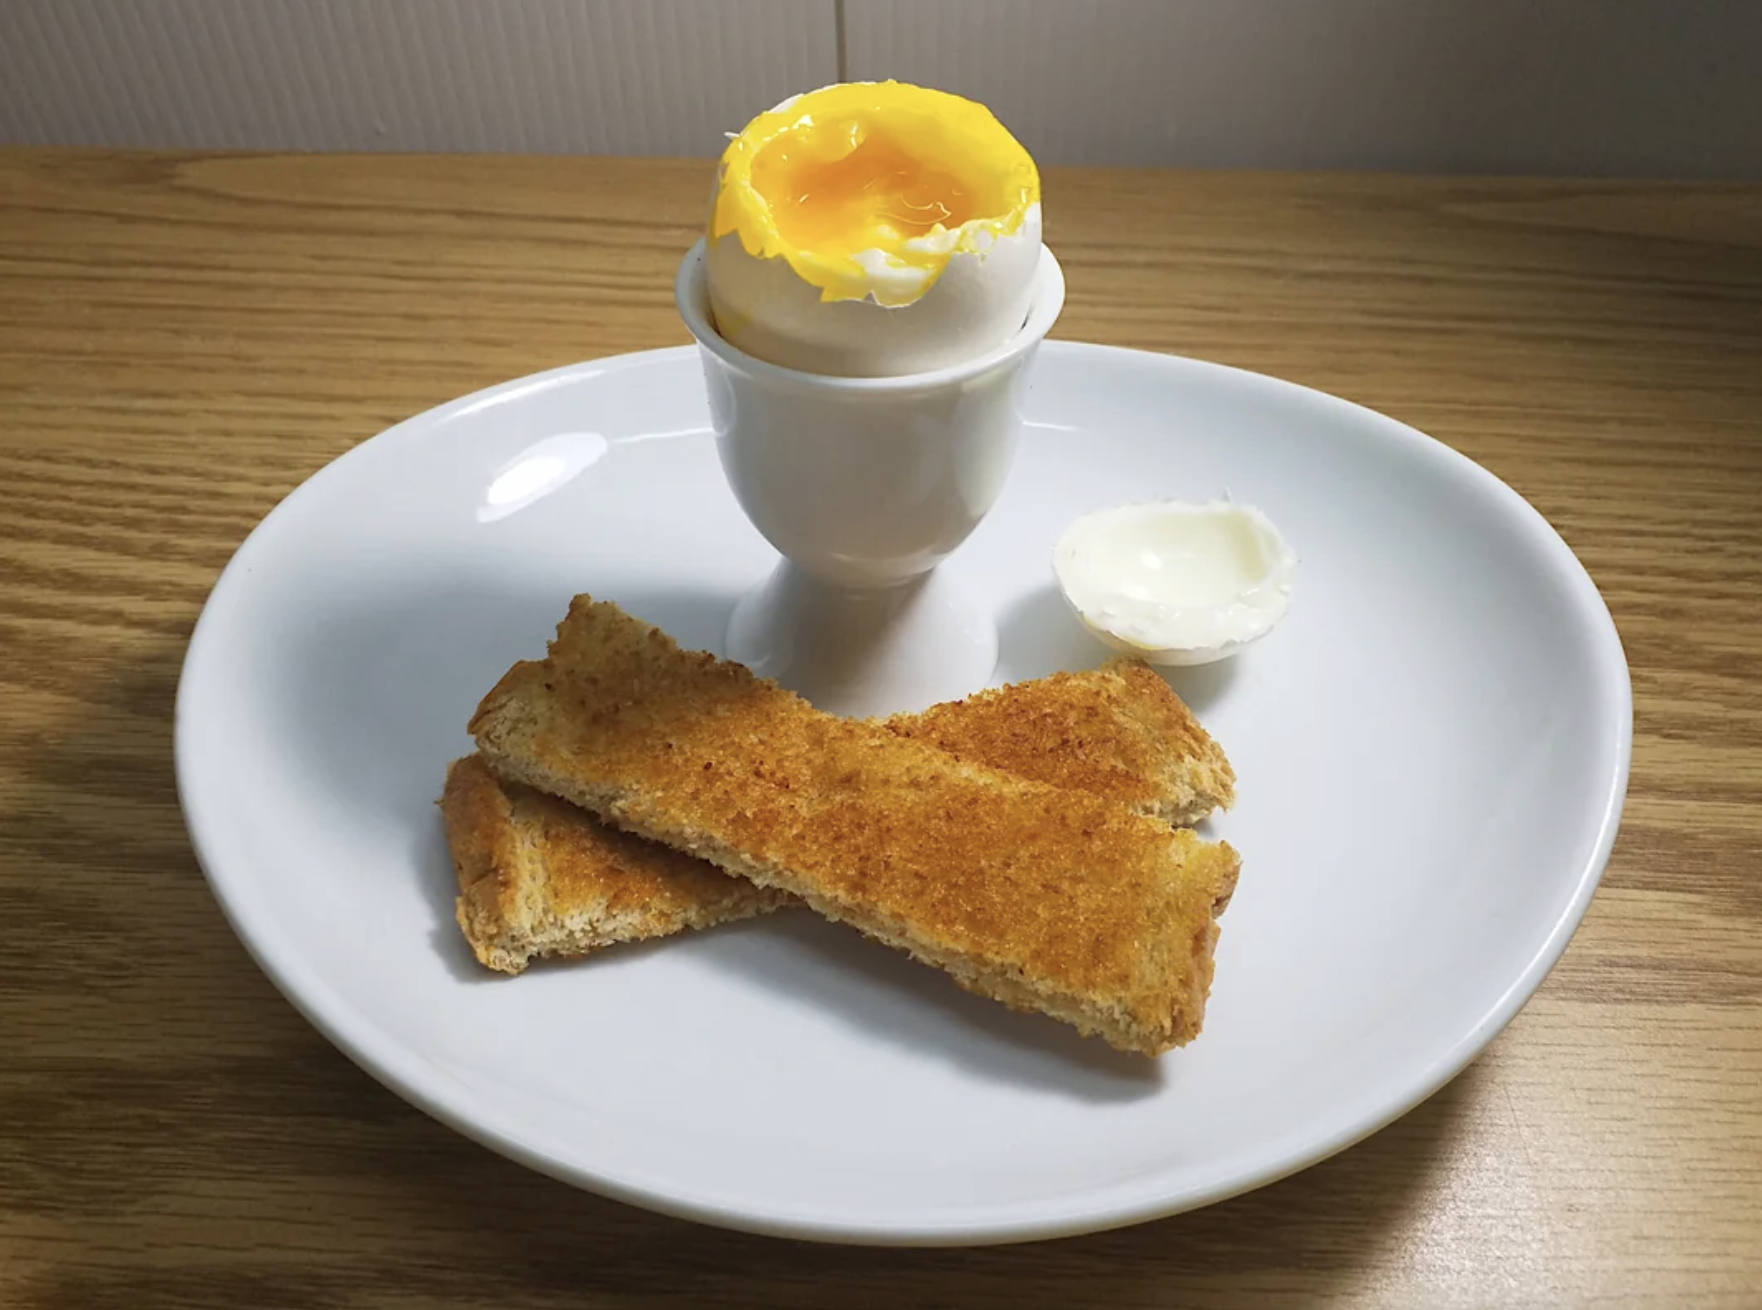 Soft-boiled egg in holder with two toast soldiers and a dollop of butter on a plate